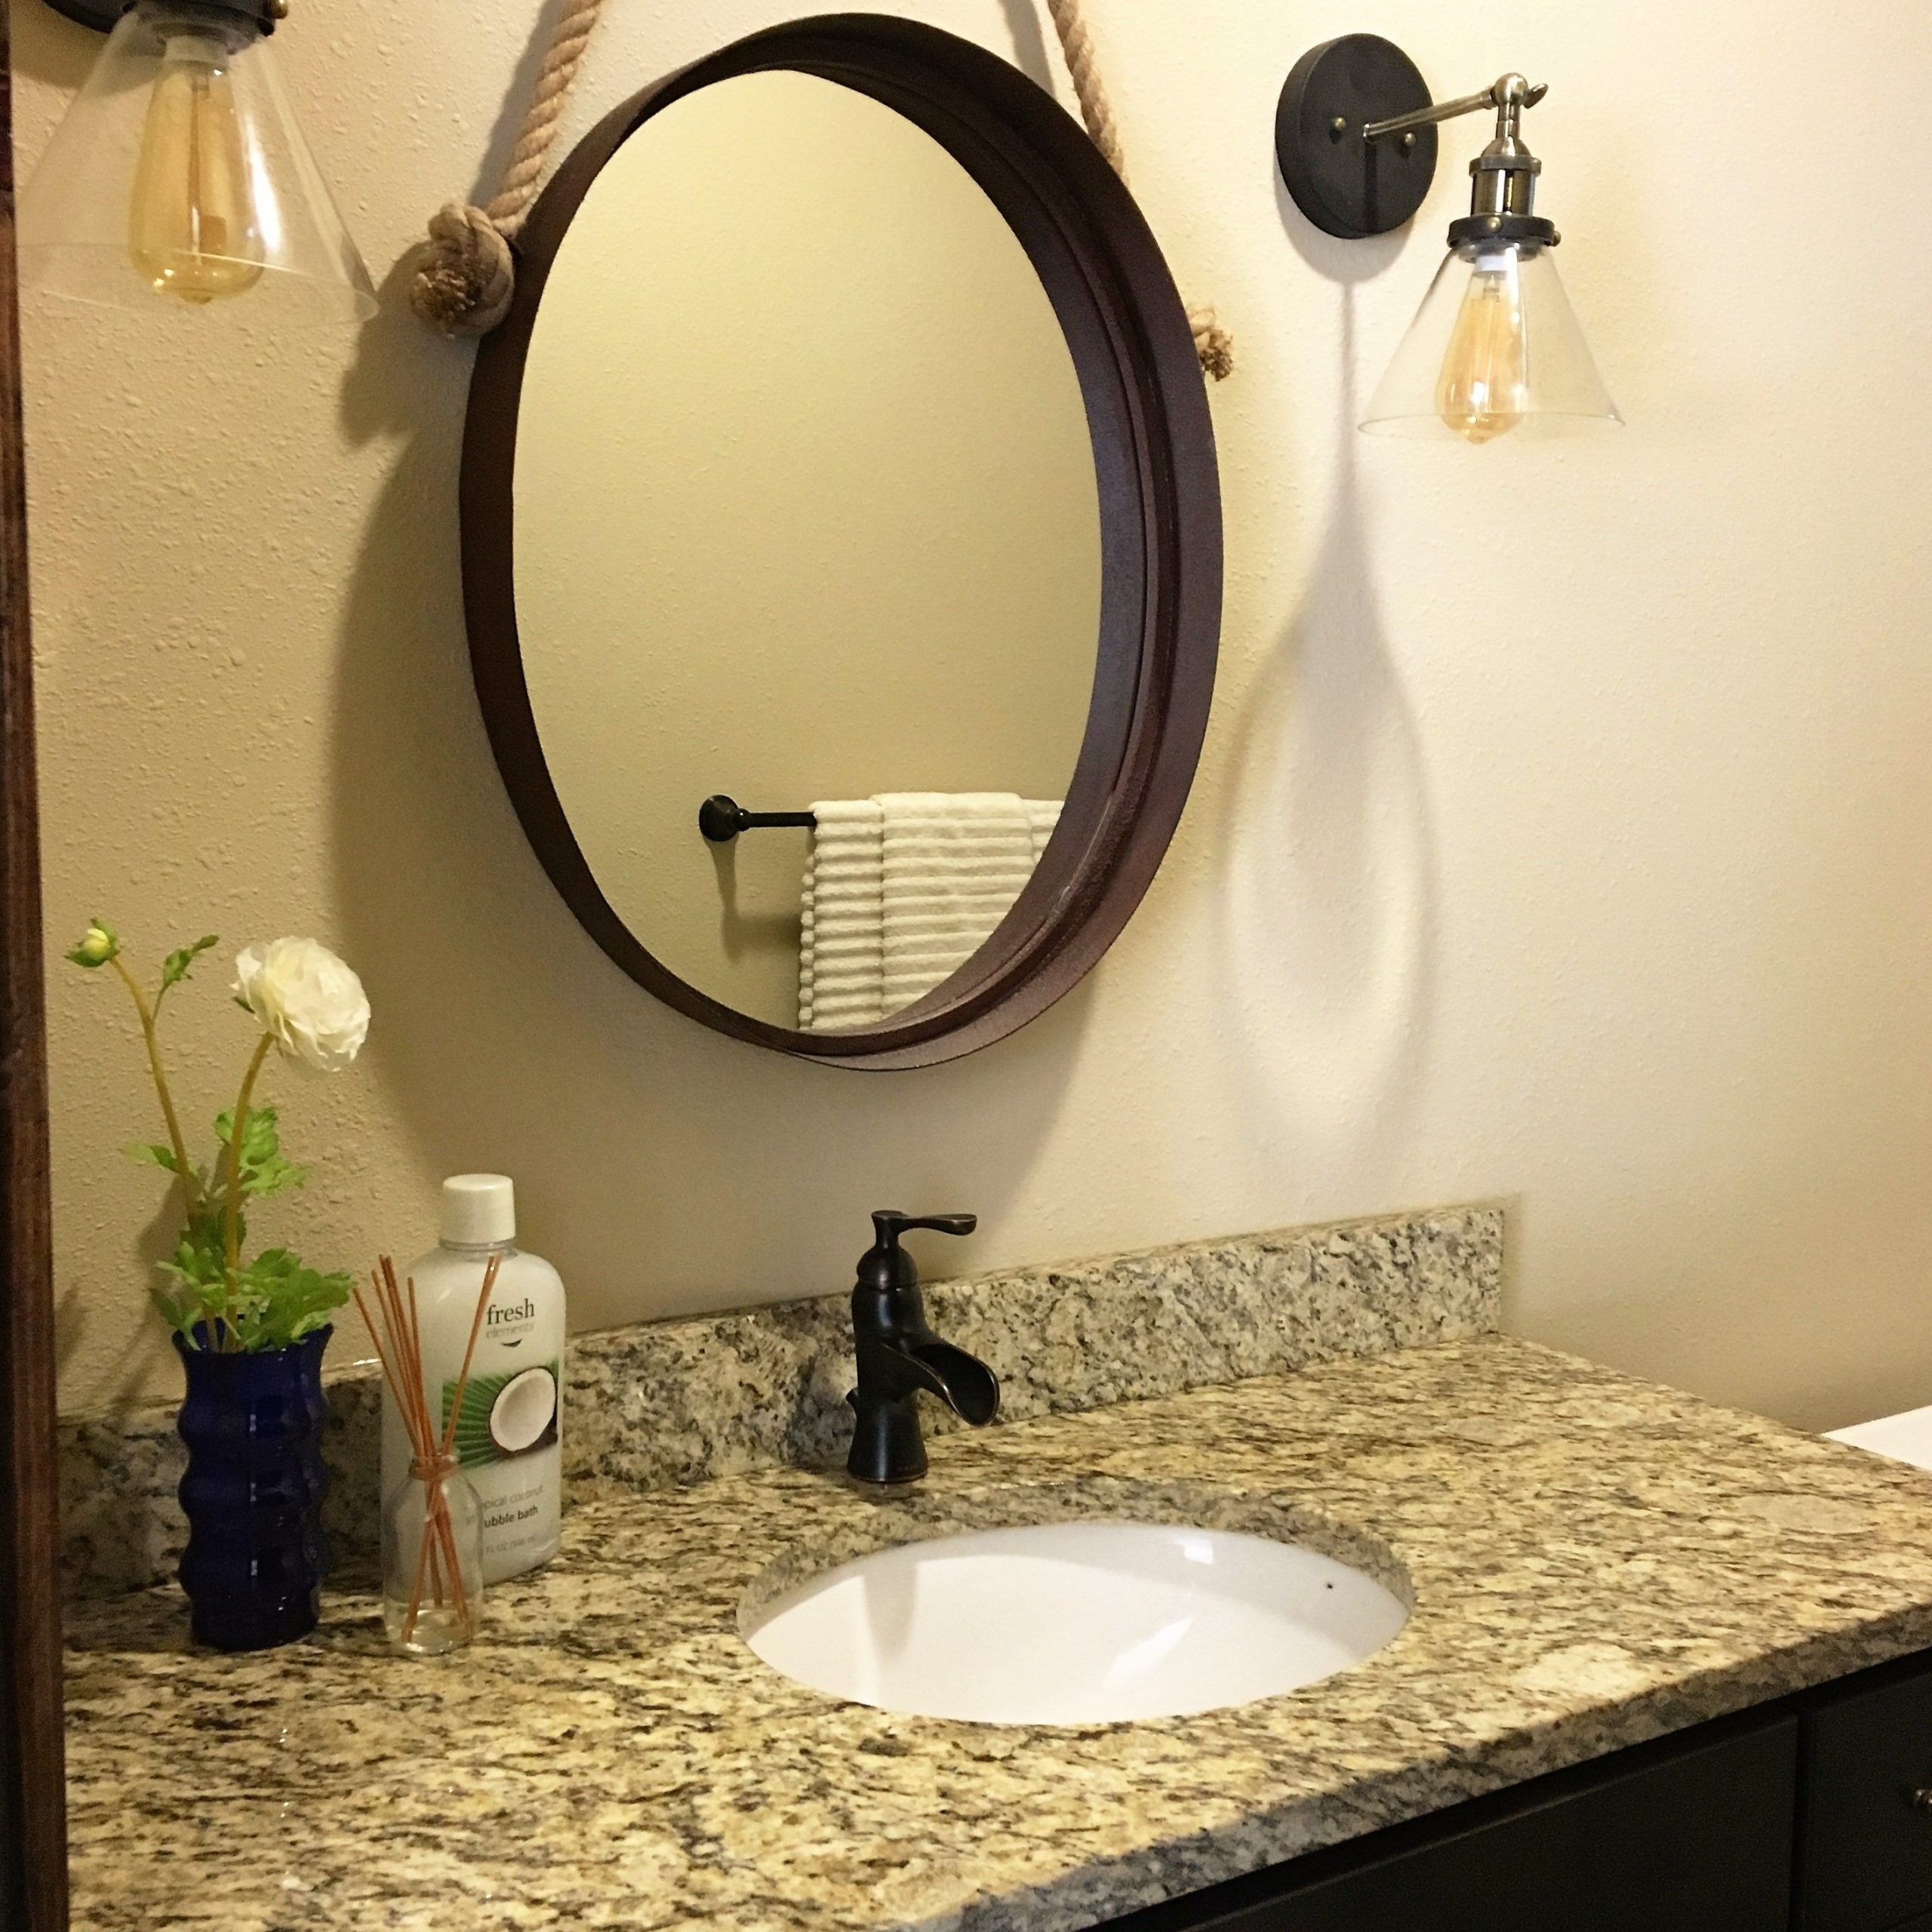 Unique Mirror And Sconce Combo To Customize This Bathroom (View 8 of 14)